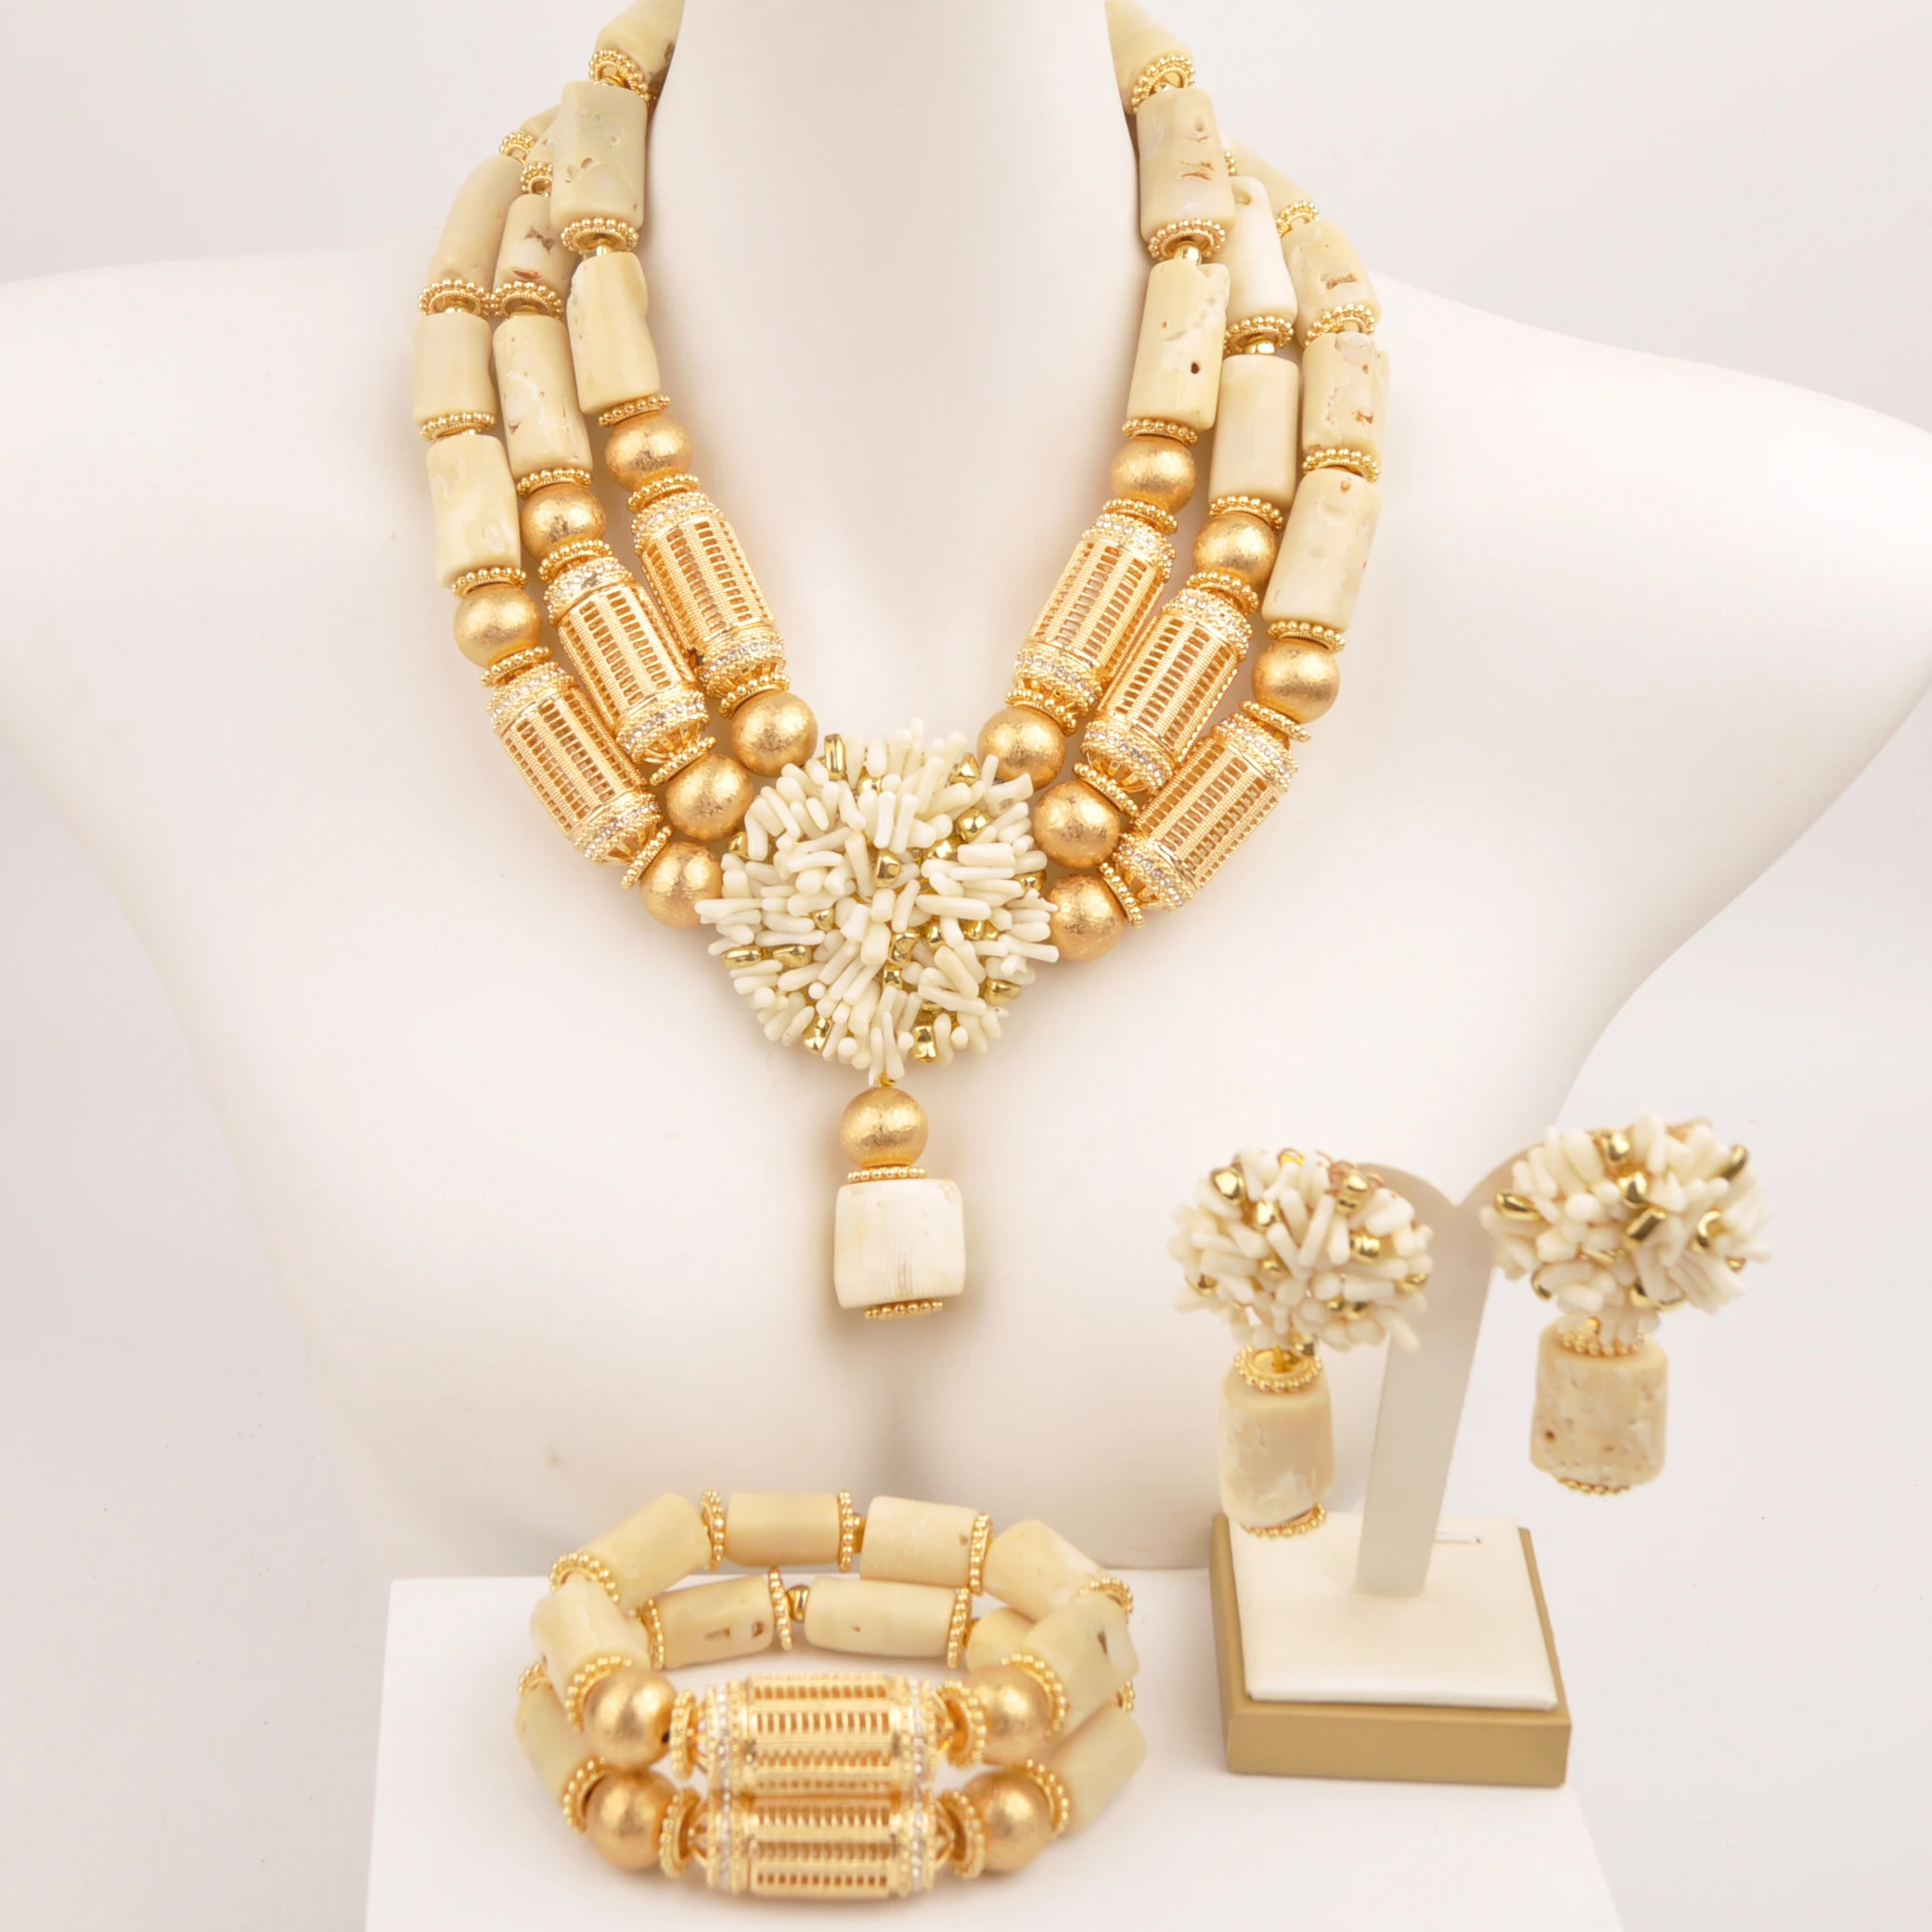 white-natural-coral-necklace-nigerian-wedding-bridal-jewelry-sets